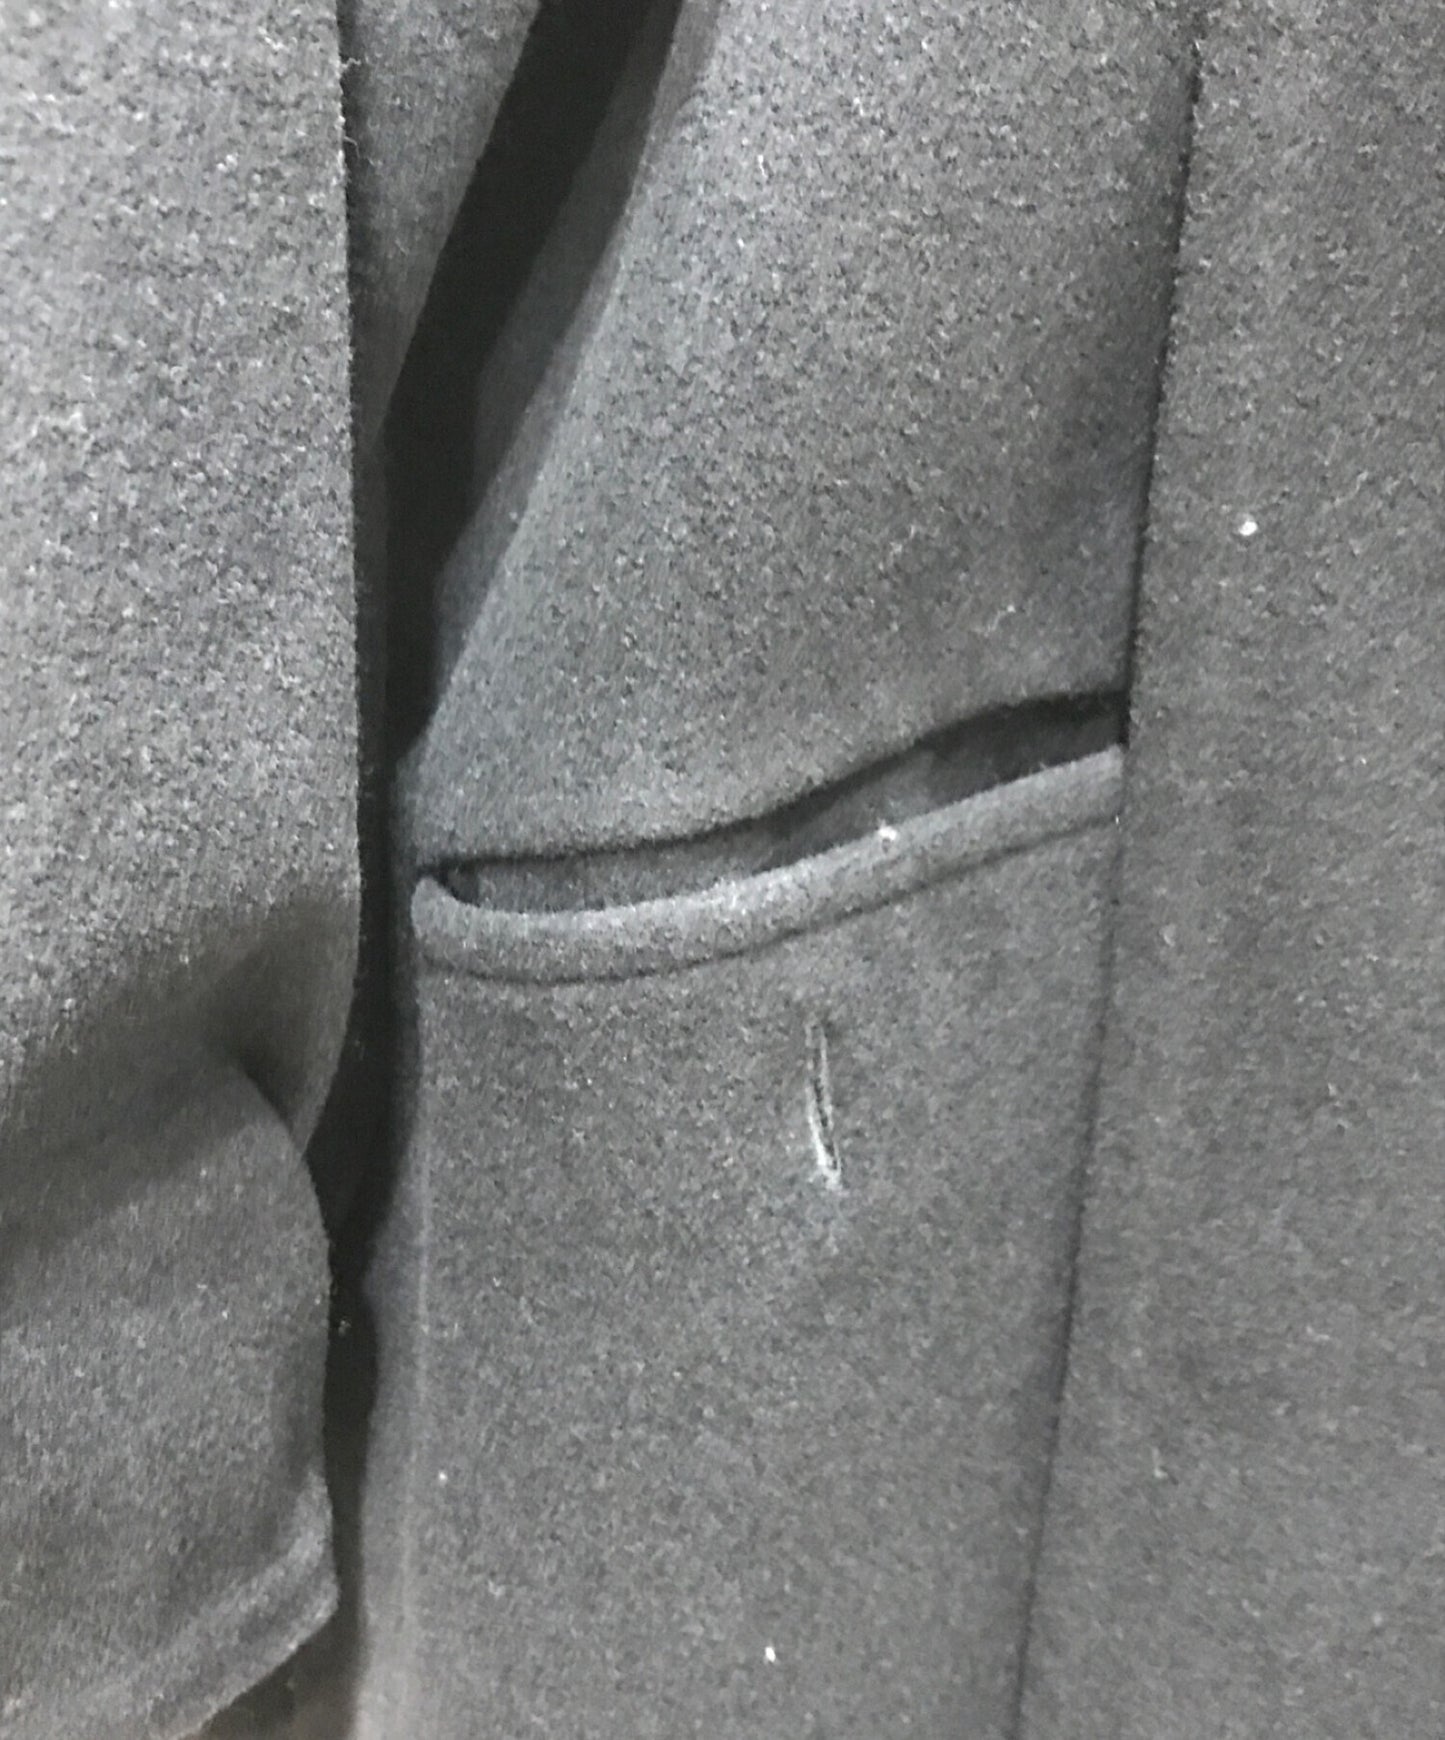 [Pre-owned] Y's stall coat YI-C54-138